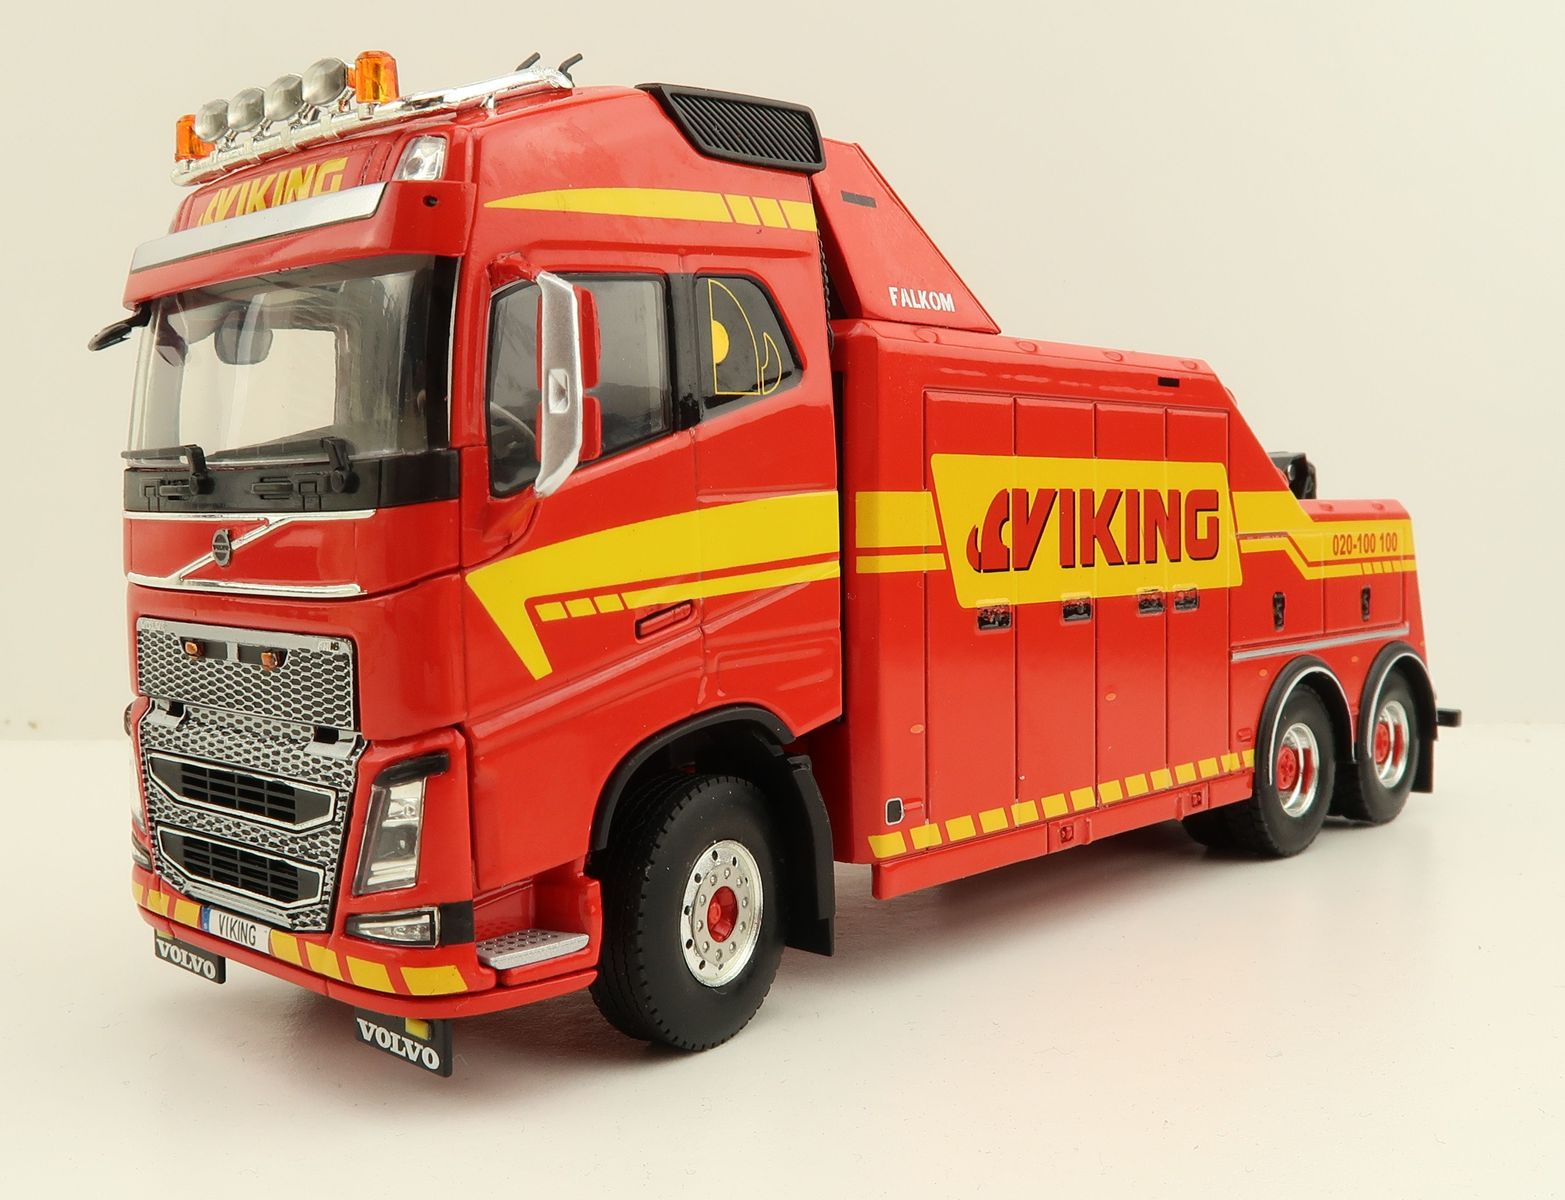 Product Image - WSI 01-3708 Volvo FH4 Globetrotter 6x2 Falkom Wrecker Truck - Viking - Scale 1:50